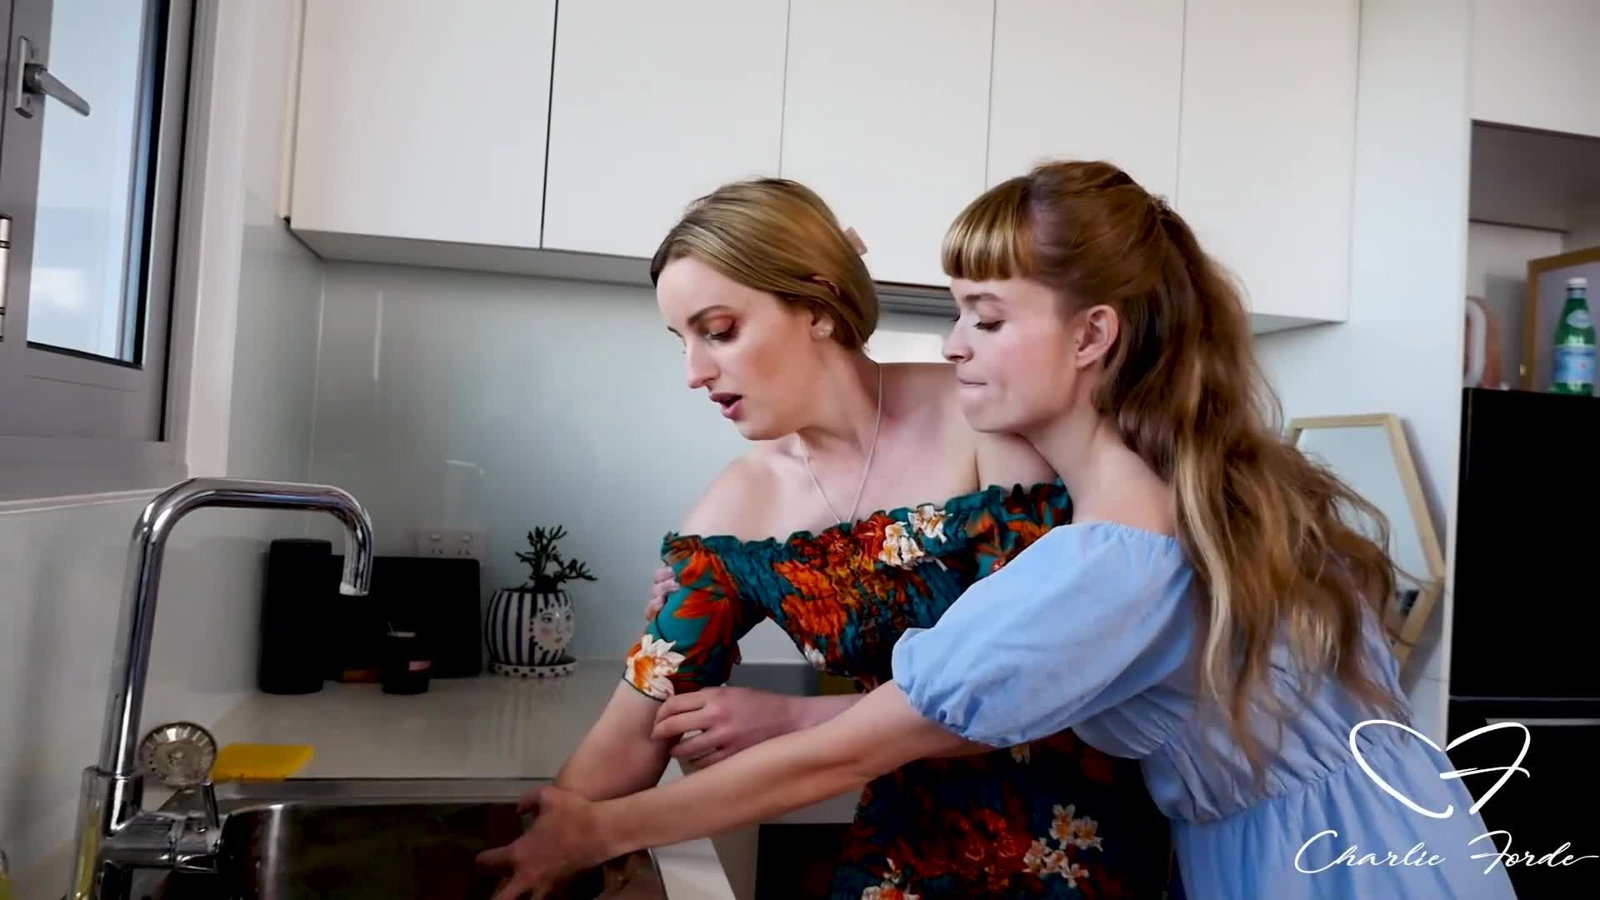 Video by charlsforde with the username @charlsforde,  February 18, 2023 at 12:58 PM. The post is about the topic Lesbian and the text says '2 Aussies taking advantage of a babe who needs rescuing.

#charlieforde
#laney
#aussie
#blonde
#girlgirl
#babesfucking
#natural
#kissing
#pussylicking'